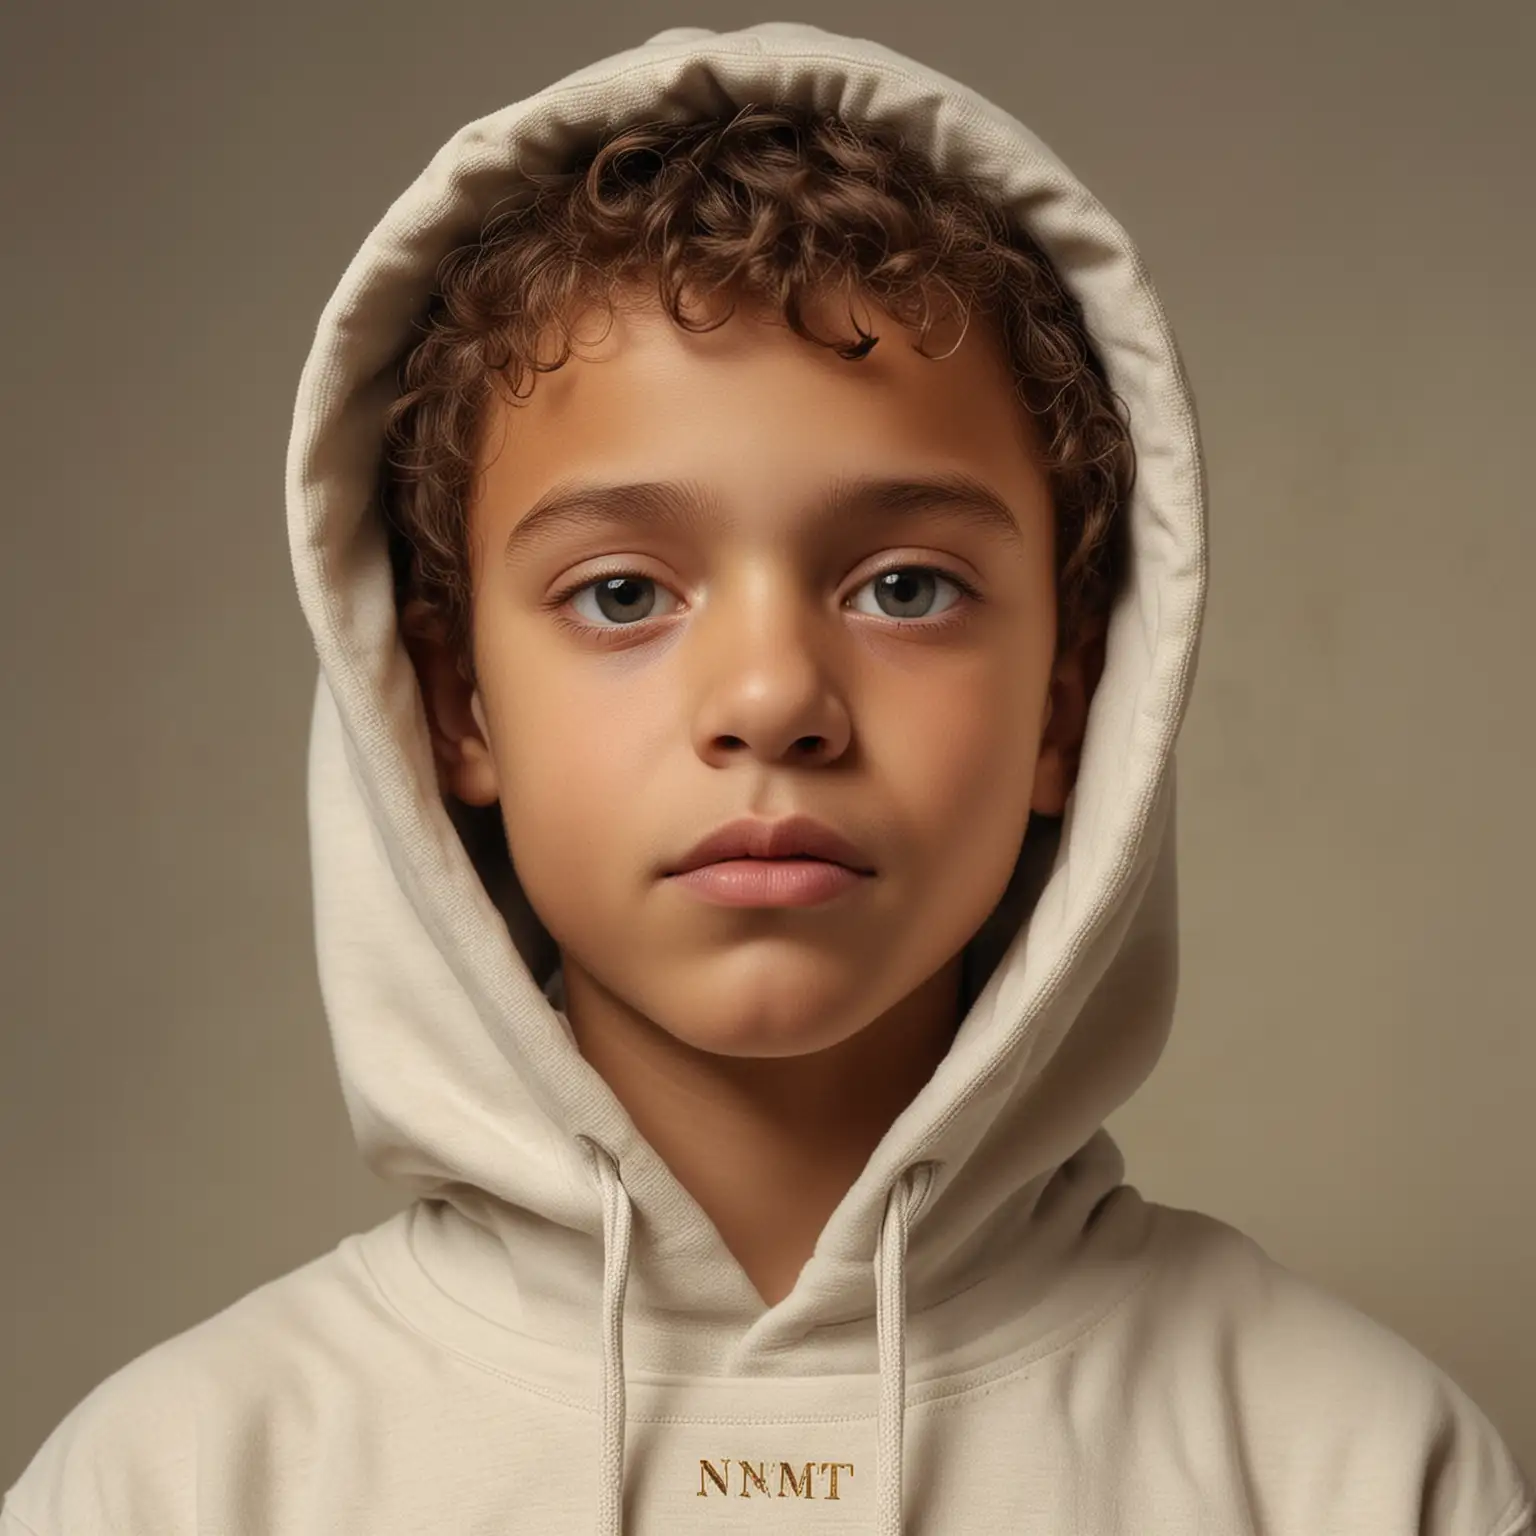 Renaissance Boy Portrait with Blue Eyes and Hoodie